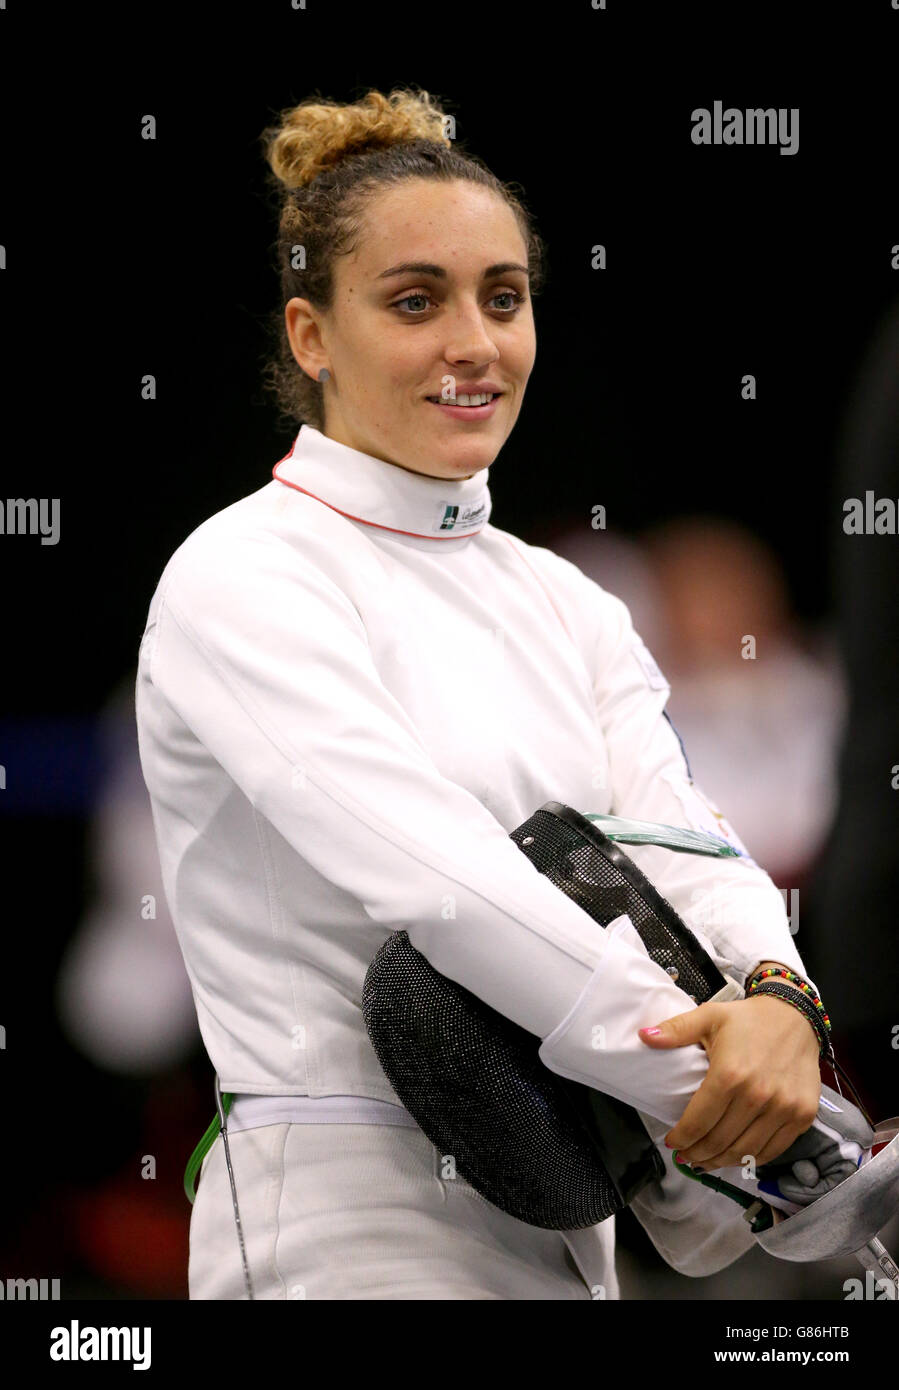 Italy's Francesca Gandolfo during day two of the European Modern Pentathlon Championships at the University of Bath. PRESS ASSOCIATION Photo. Picture date: Wednesday August 19, 2015. See PA story PENTATHLON European. Photo credit should read: Tim Goode/ PA Wire Stock Photo